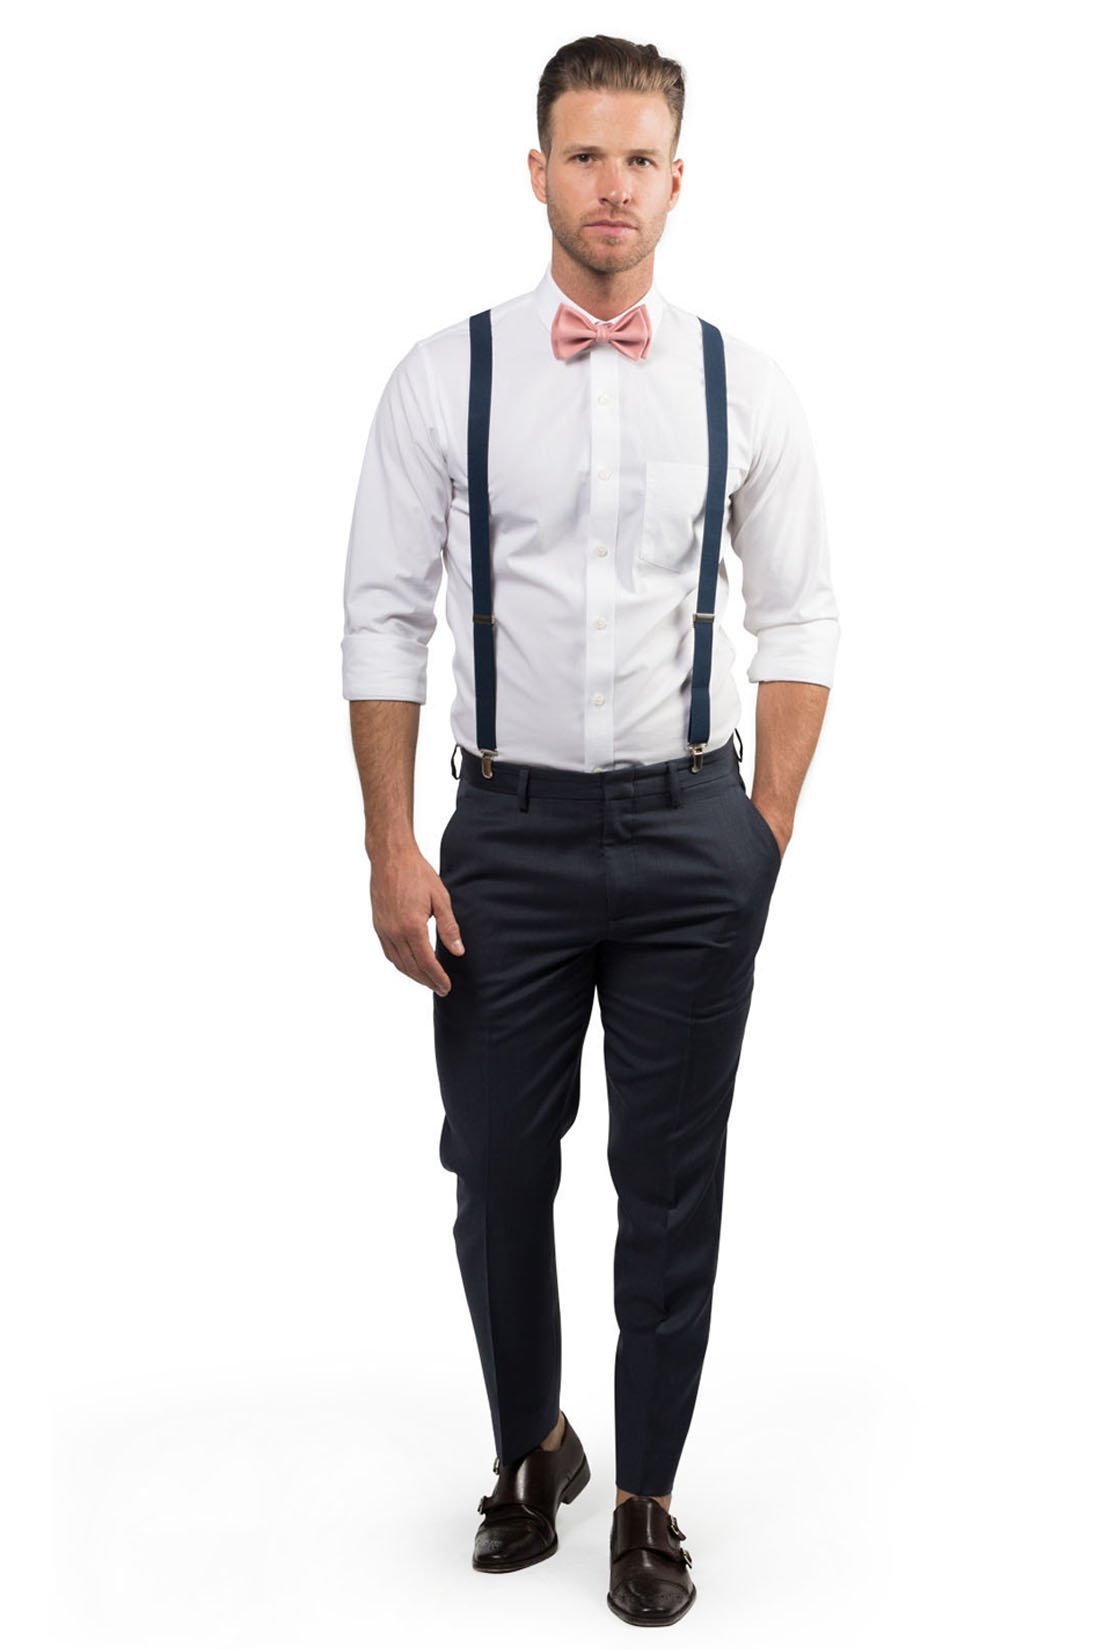 Pin on bowtie and suspenders wedding